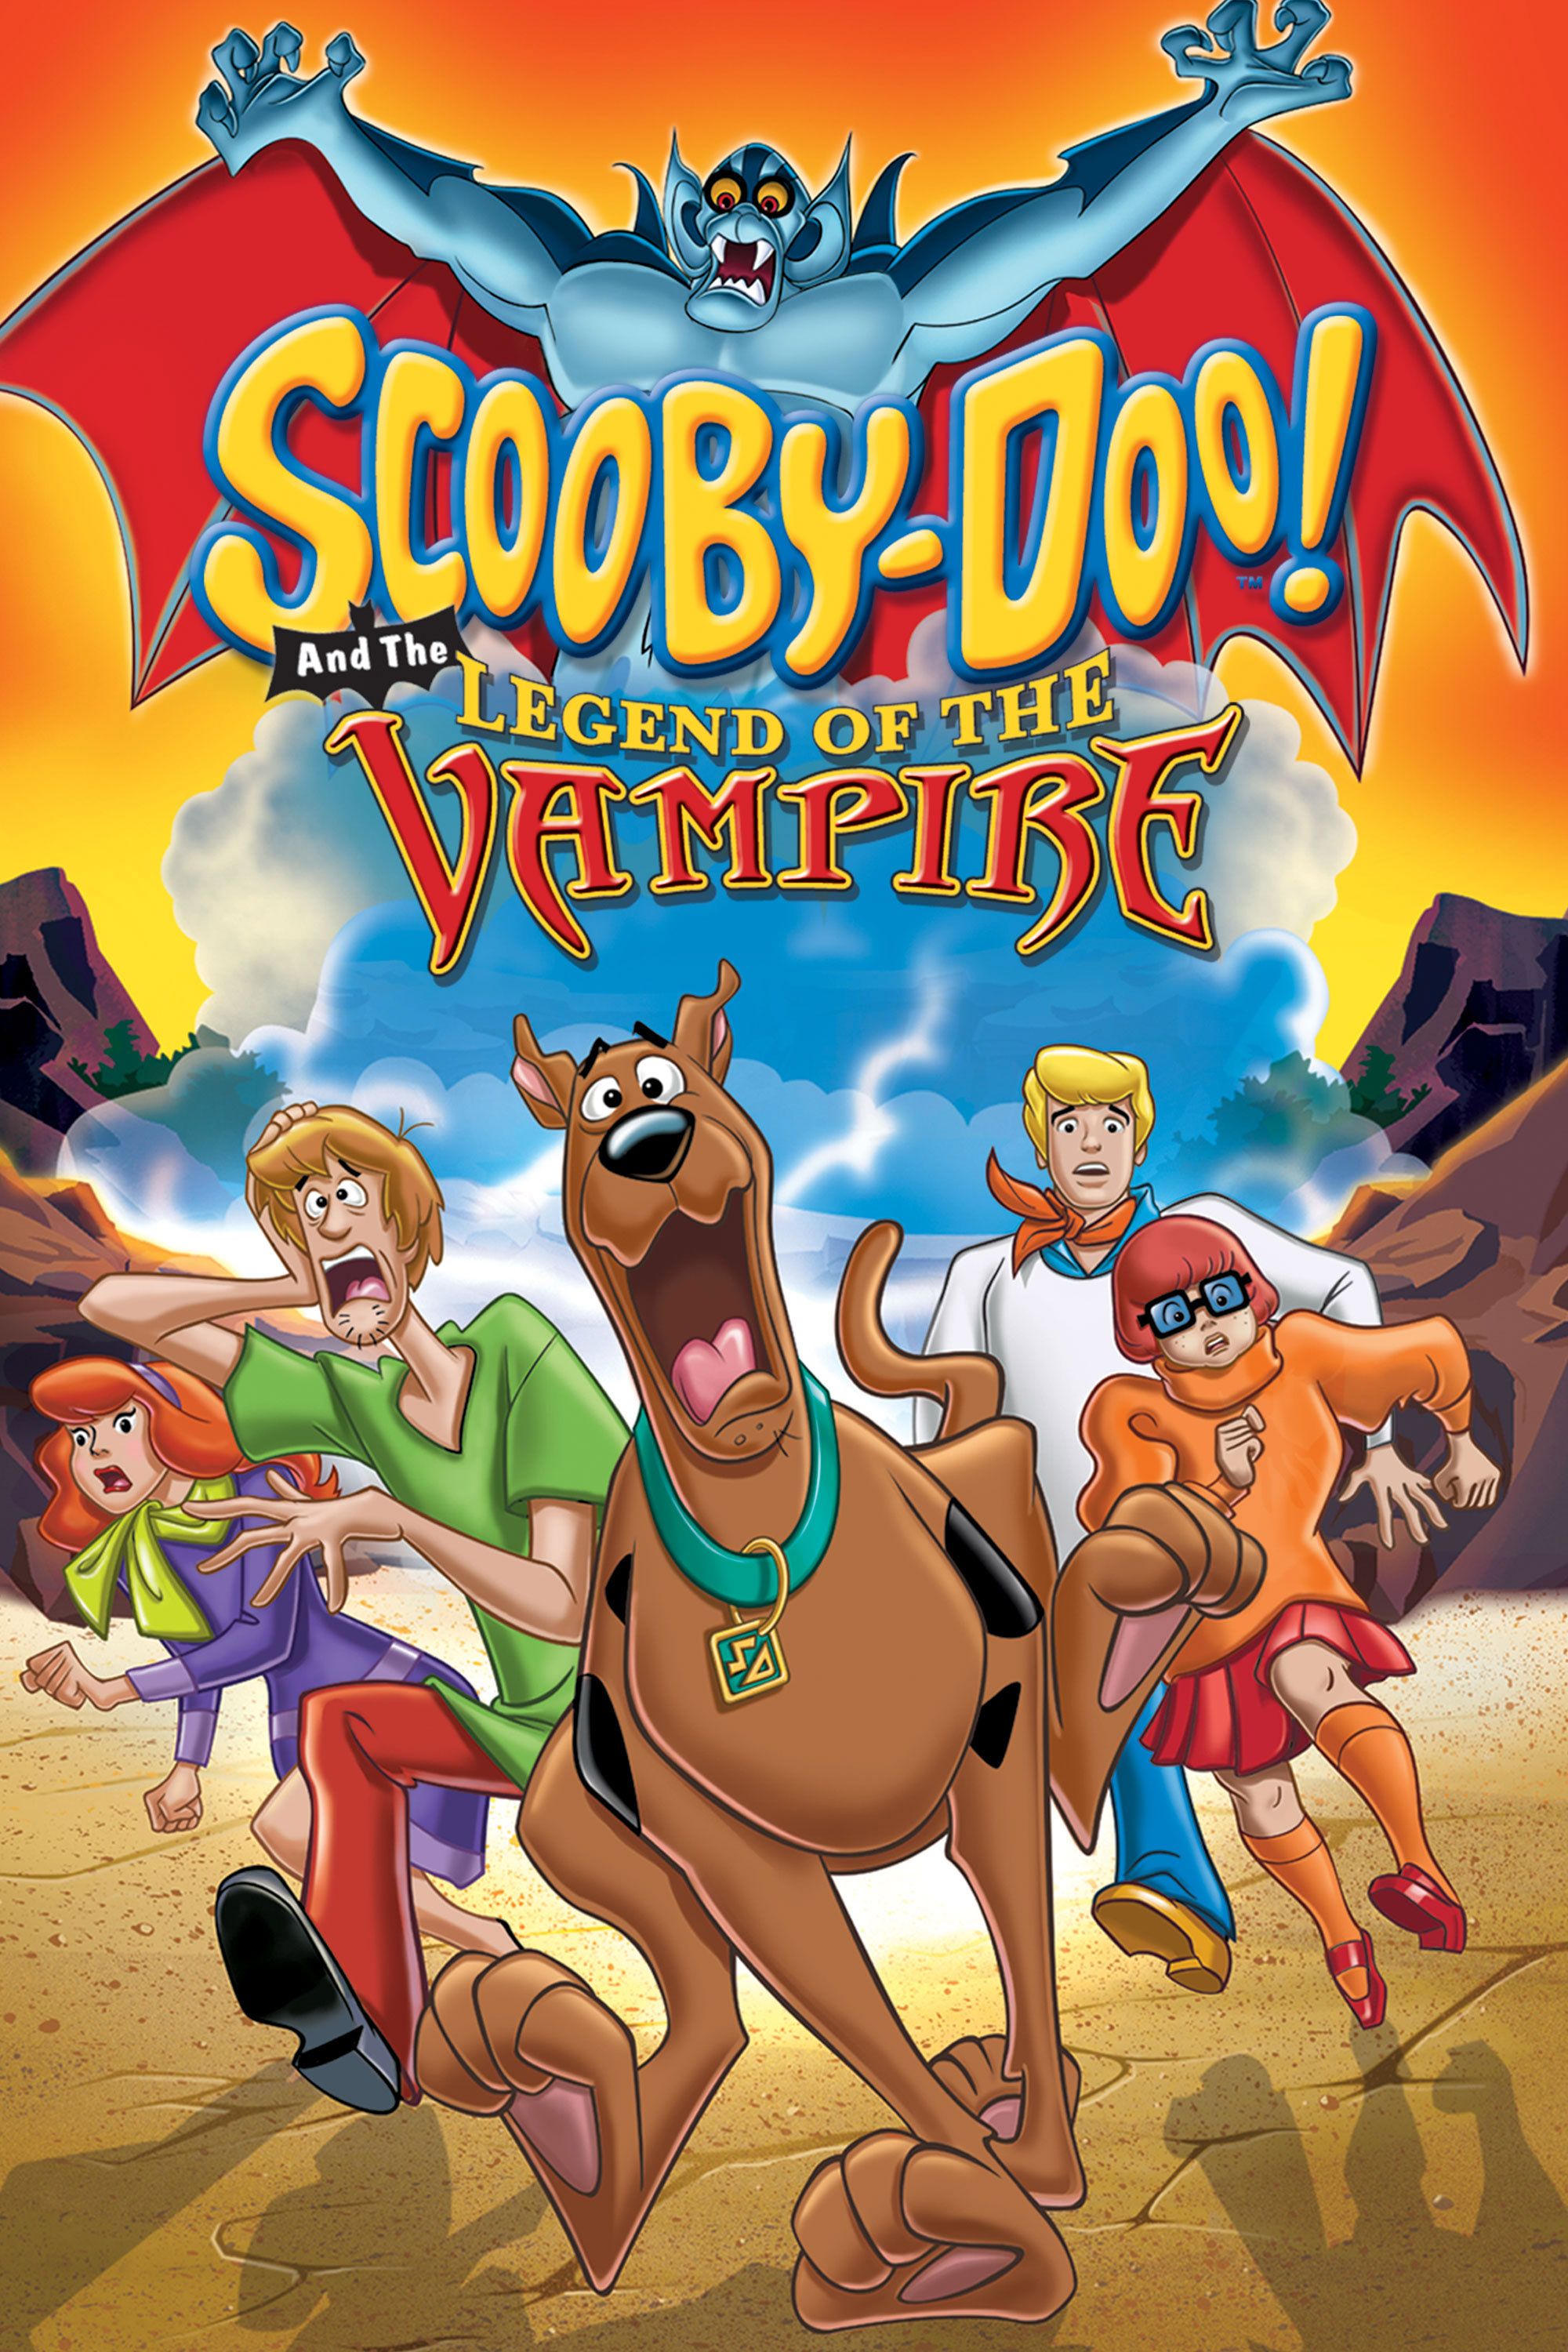 scooby doo 2 monsters unleashed full movie online